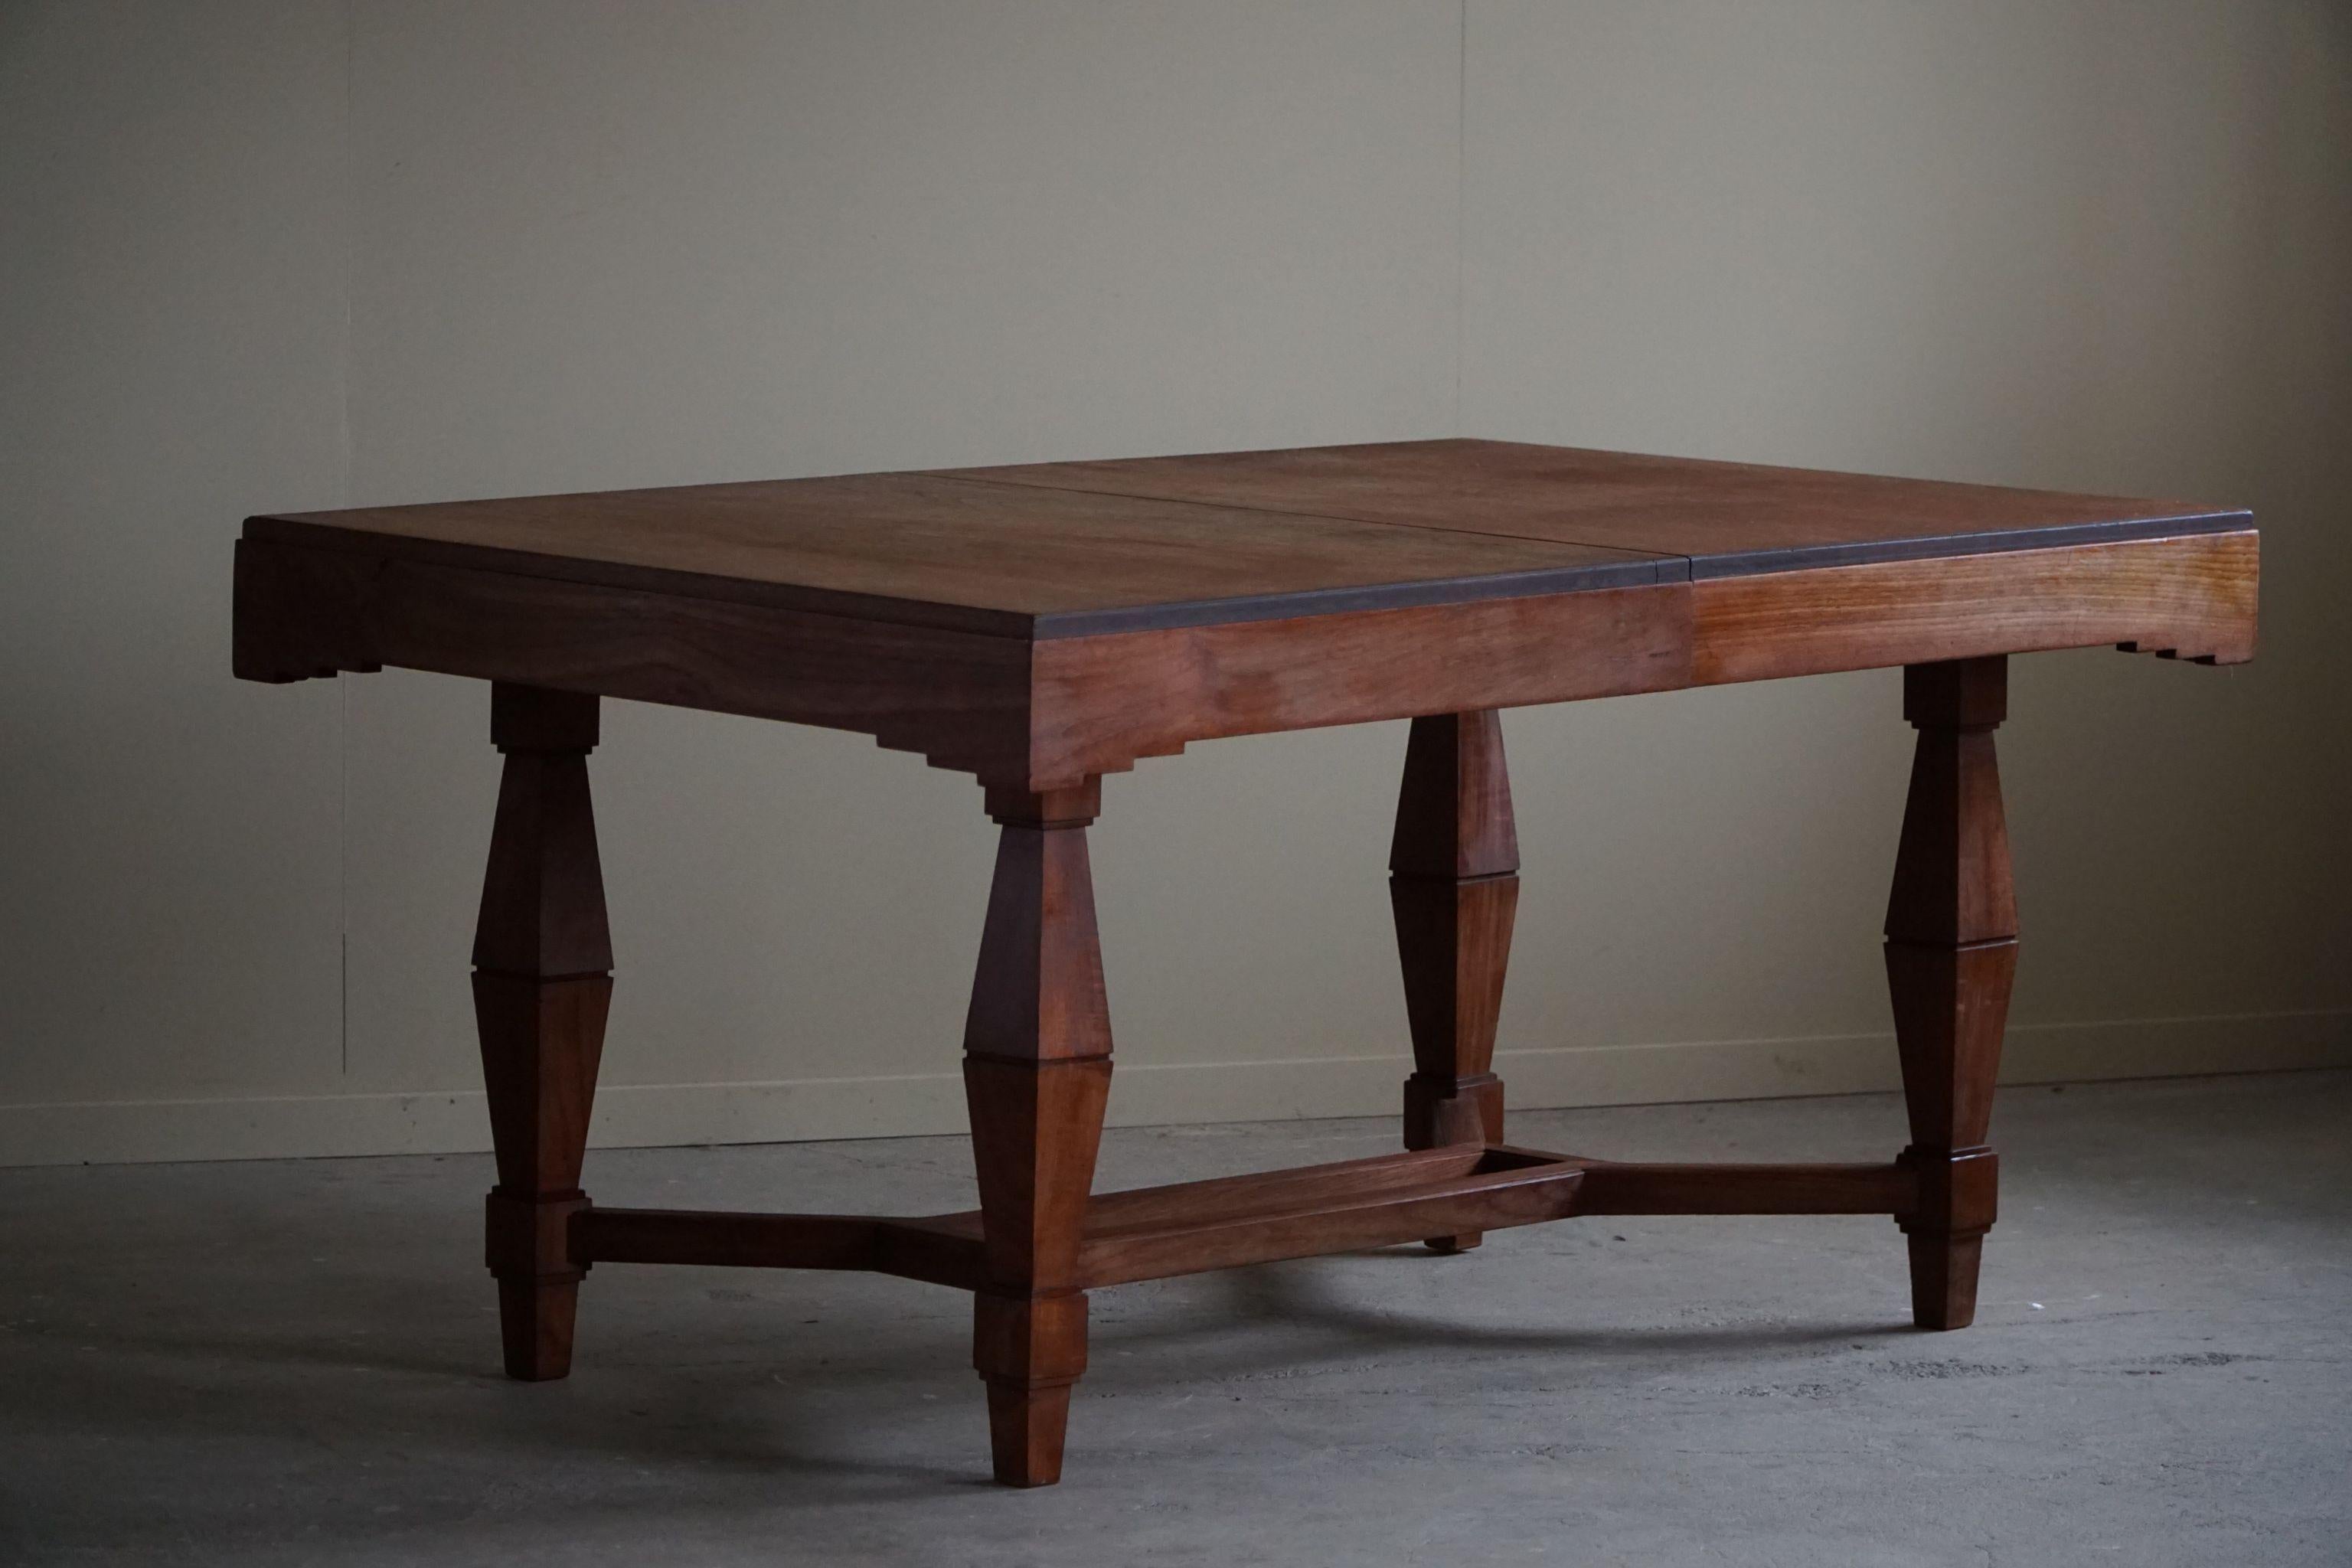 This Art Deco dining table from the 1940s, crafted by a Danish cabinetmaker, is a stunning fusion of style and functionality. Made from rich teak wood, it exudes warmth and elegance, while its Art Deco design elements add a touch of elegance. The